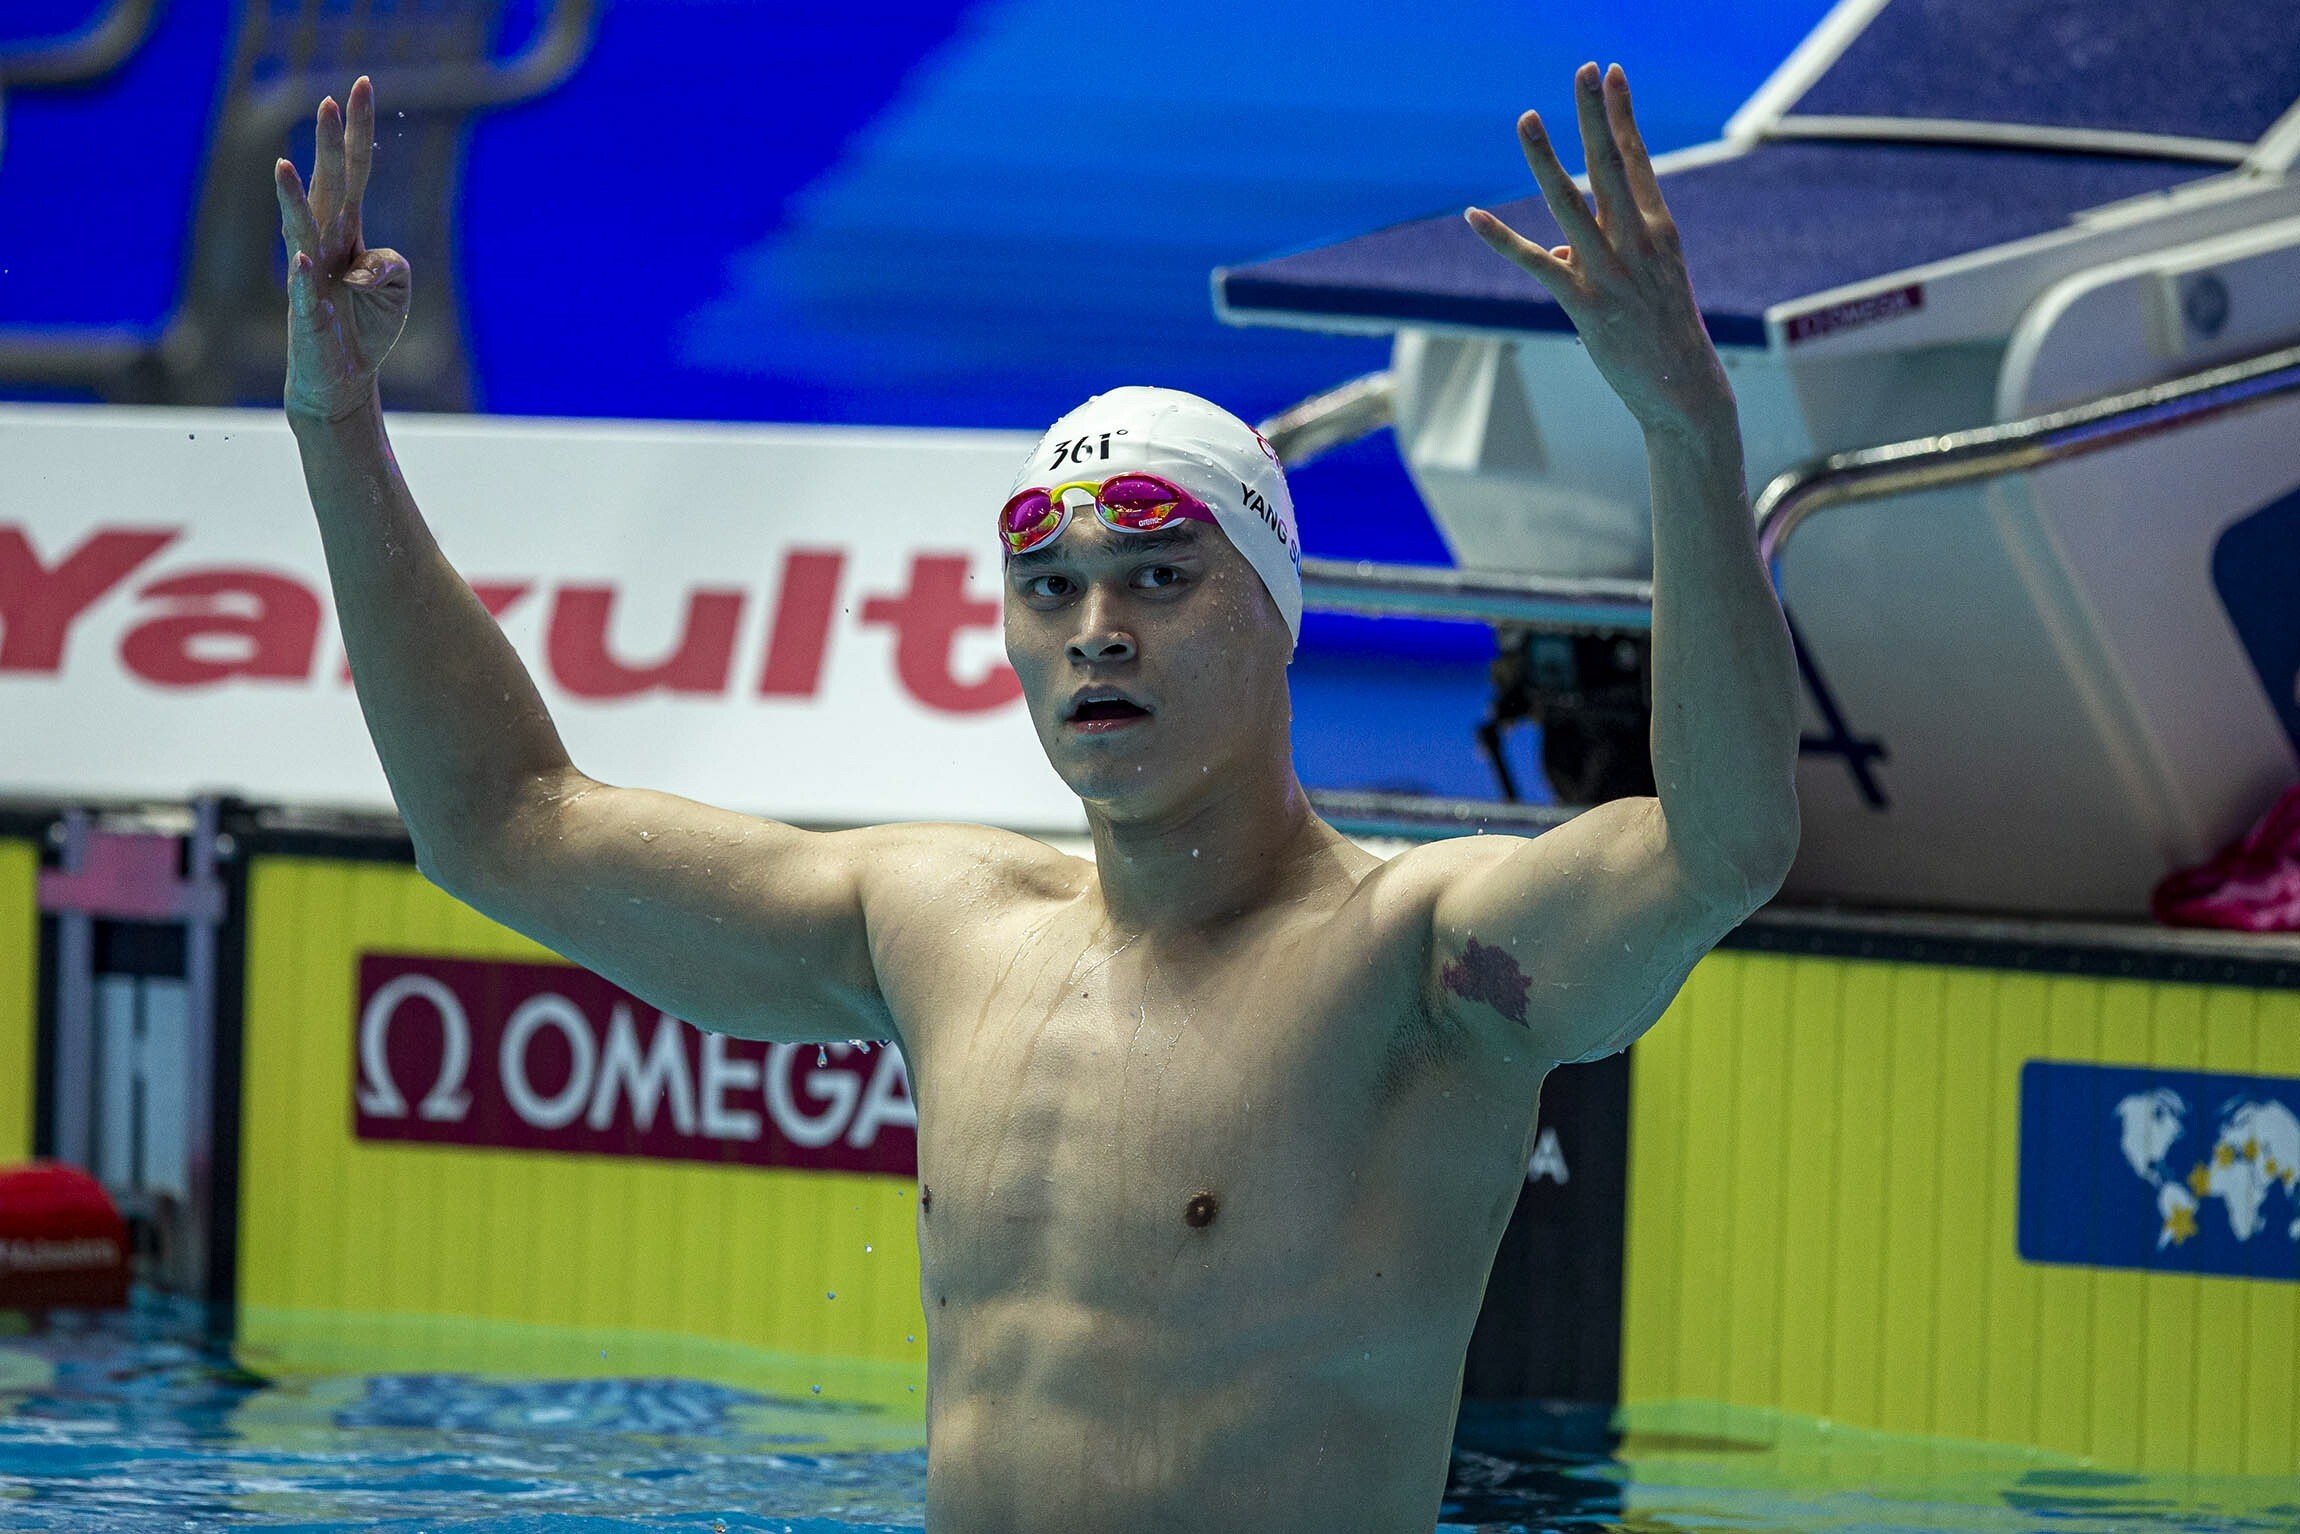 Sun Yang reacts to winning the 400m freestyle final at the 2019 world championships in South Korea. Photo: EPA